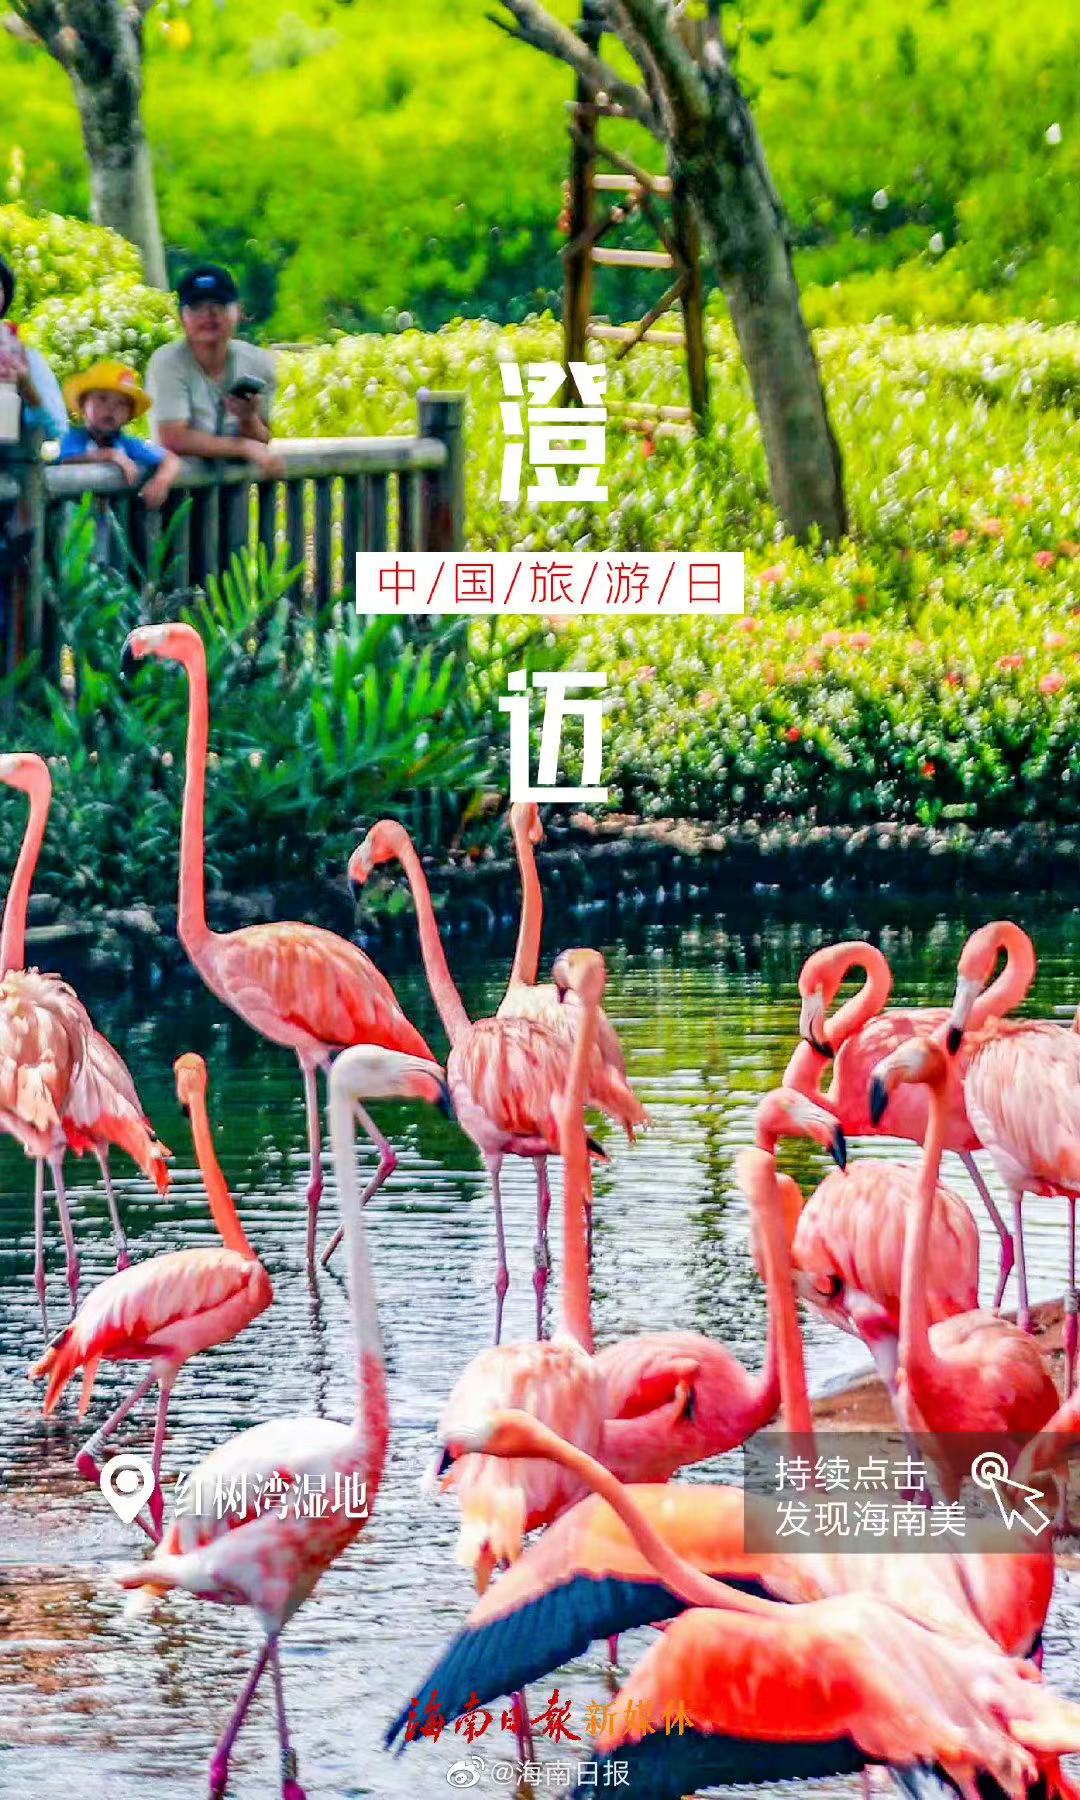 Through "creative travel photography + travel live broadcast", the rich cultural and tourism resources of Hainan are displayed in real scenes.